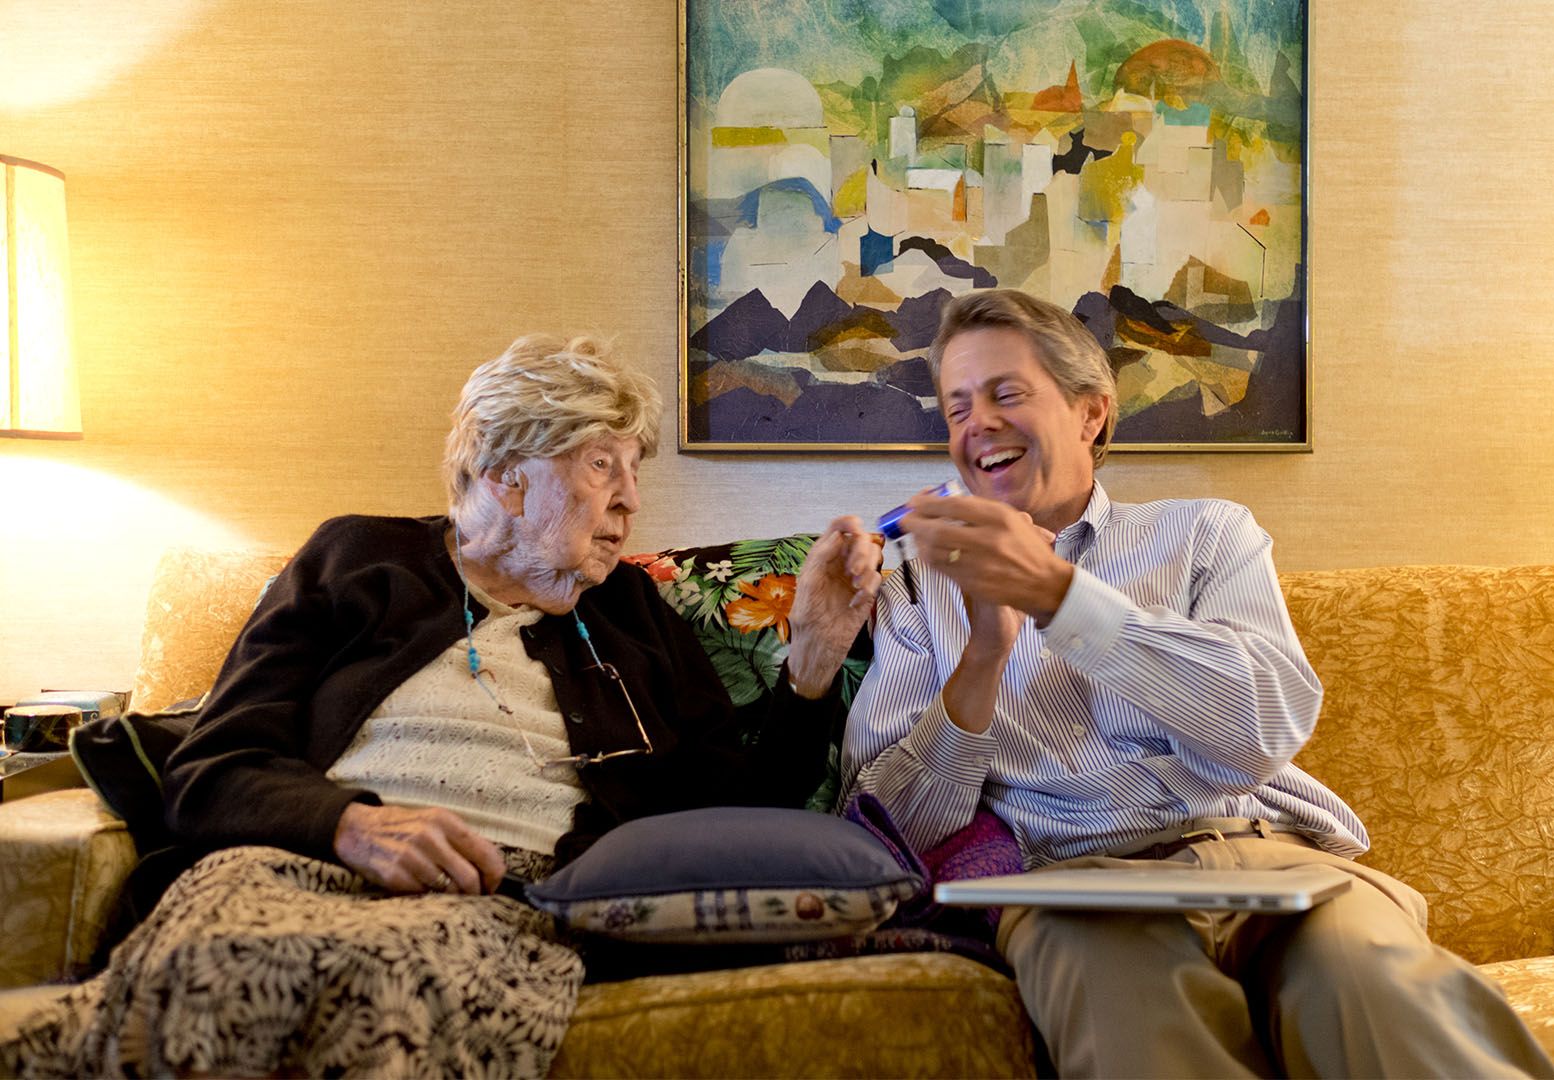 BatesNews editor Jay Burns interviews 101-year-old alumna June Lovelace Griffin, Class of 1936, for a story in September 2015. (Phyllis Graber Jensen/Bates College)